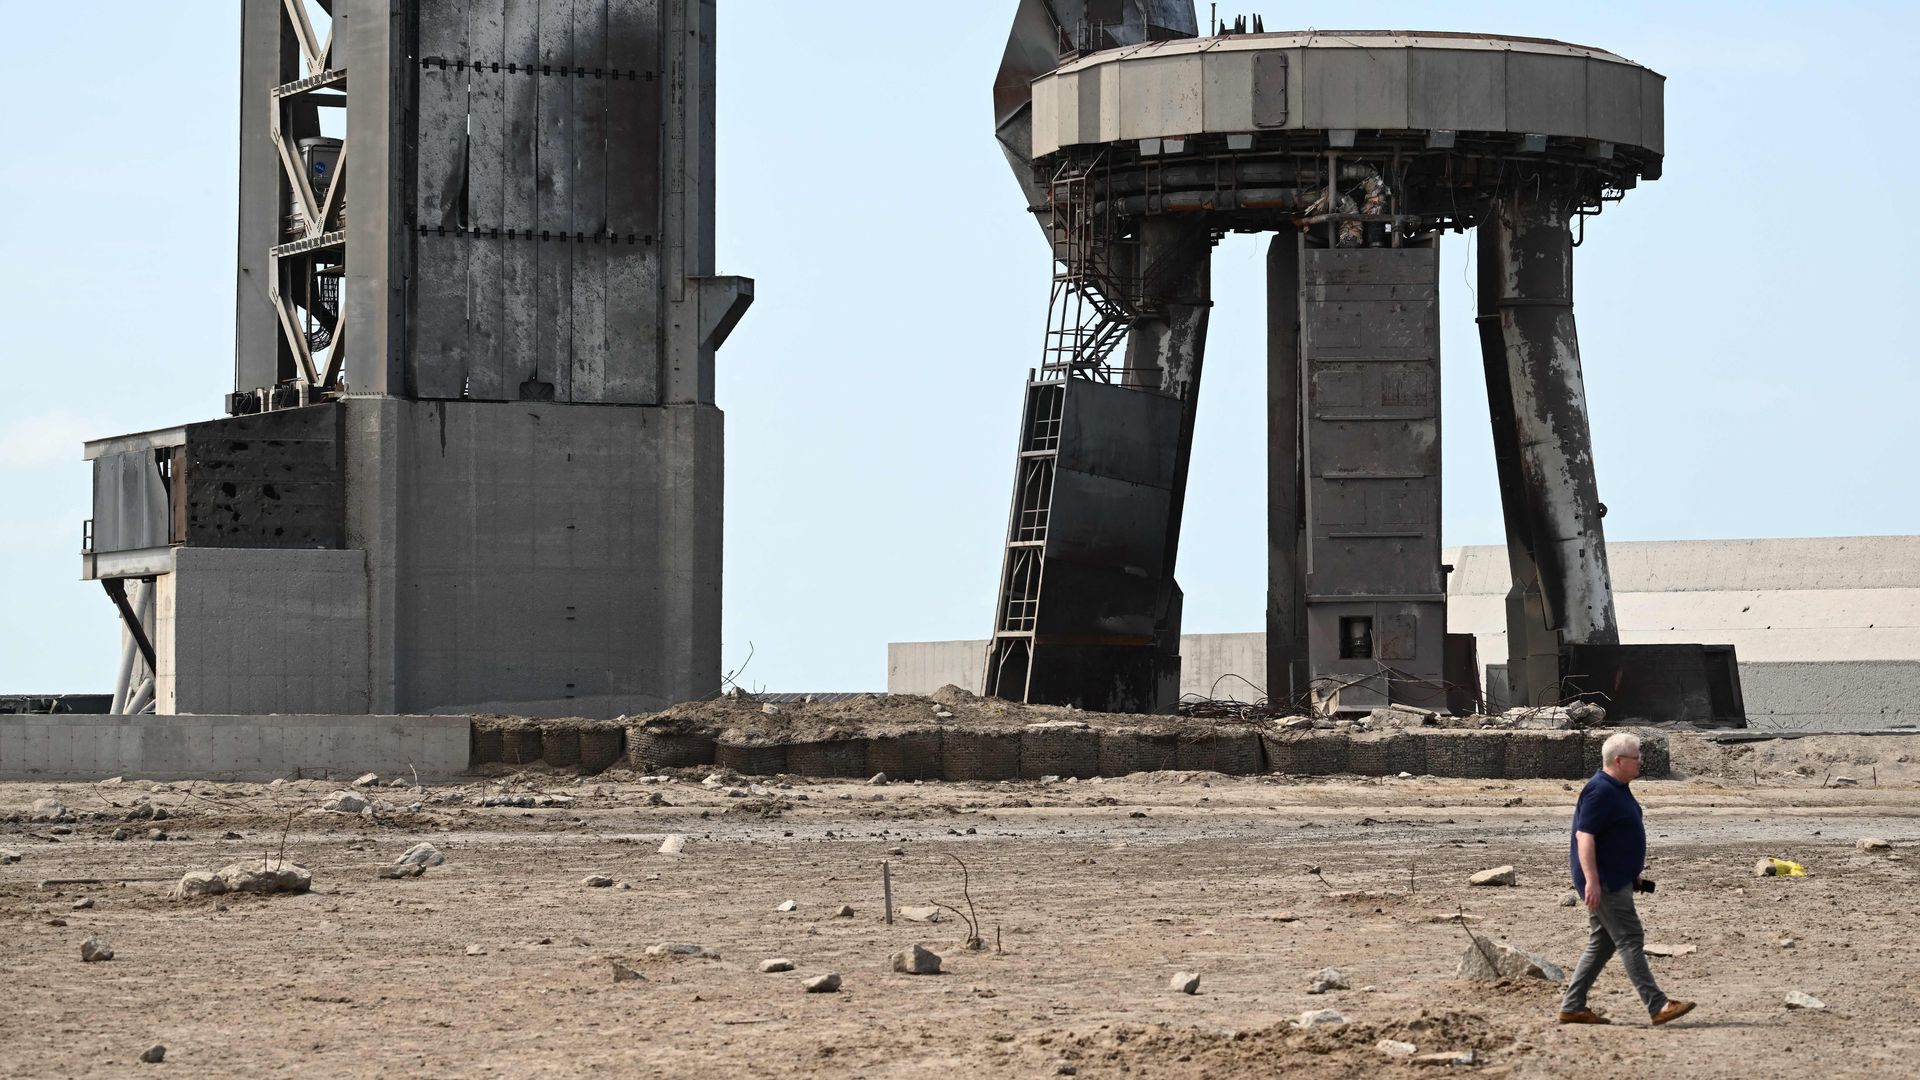 A person walking through a debris field in front of SpaceX's Starship launch pad in Boca Chica, Texas, on April 22.